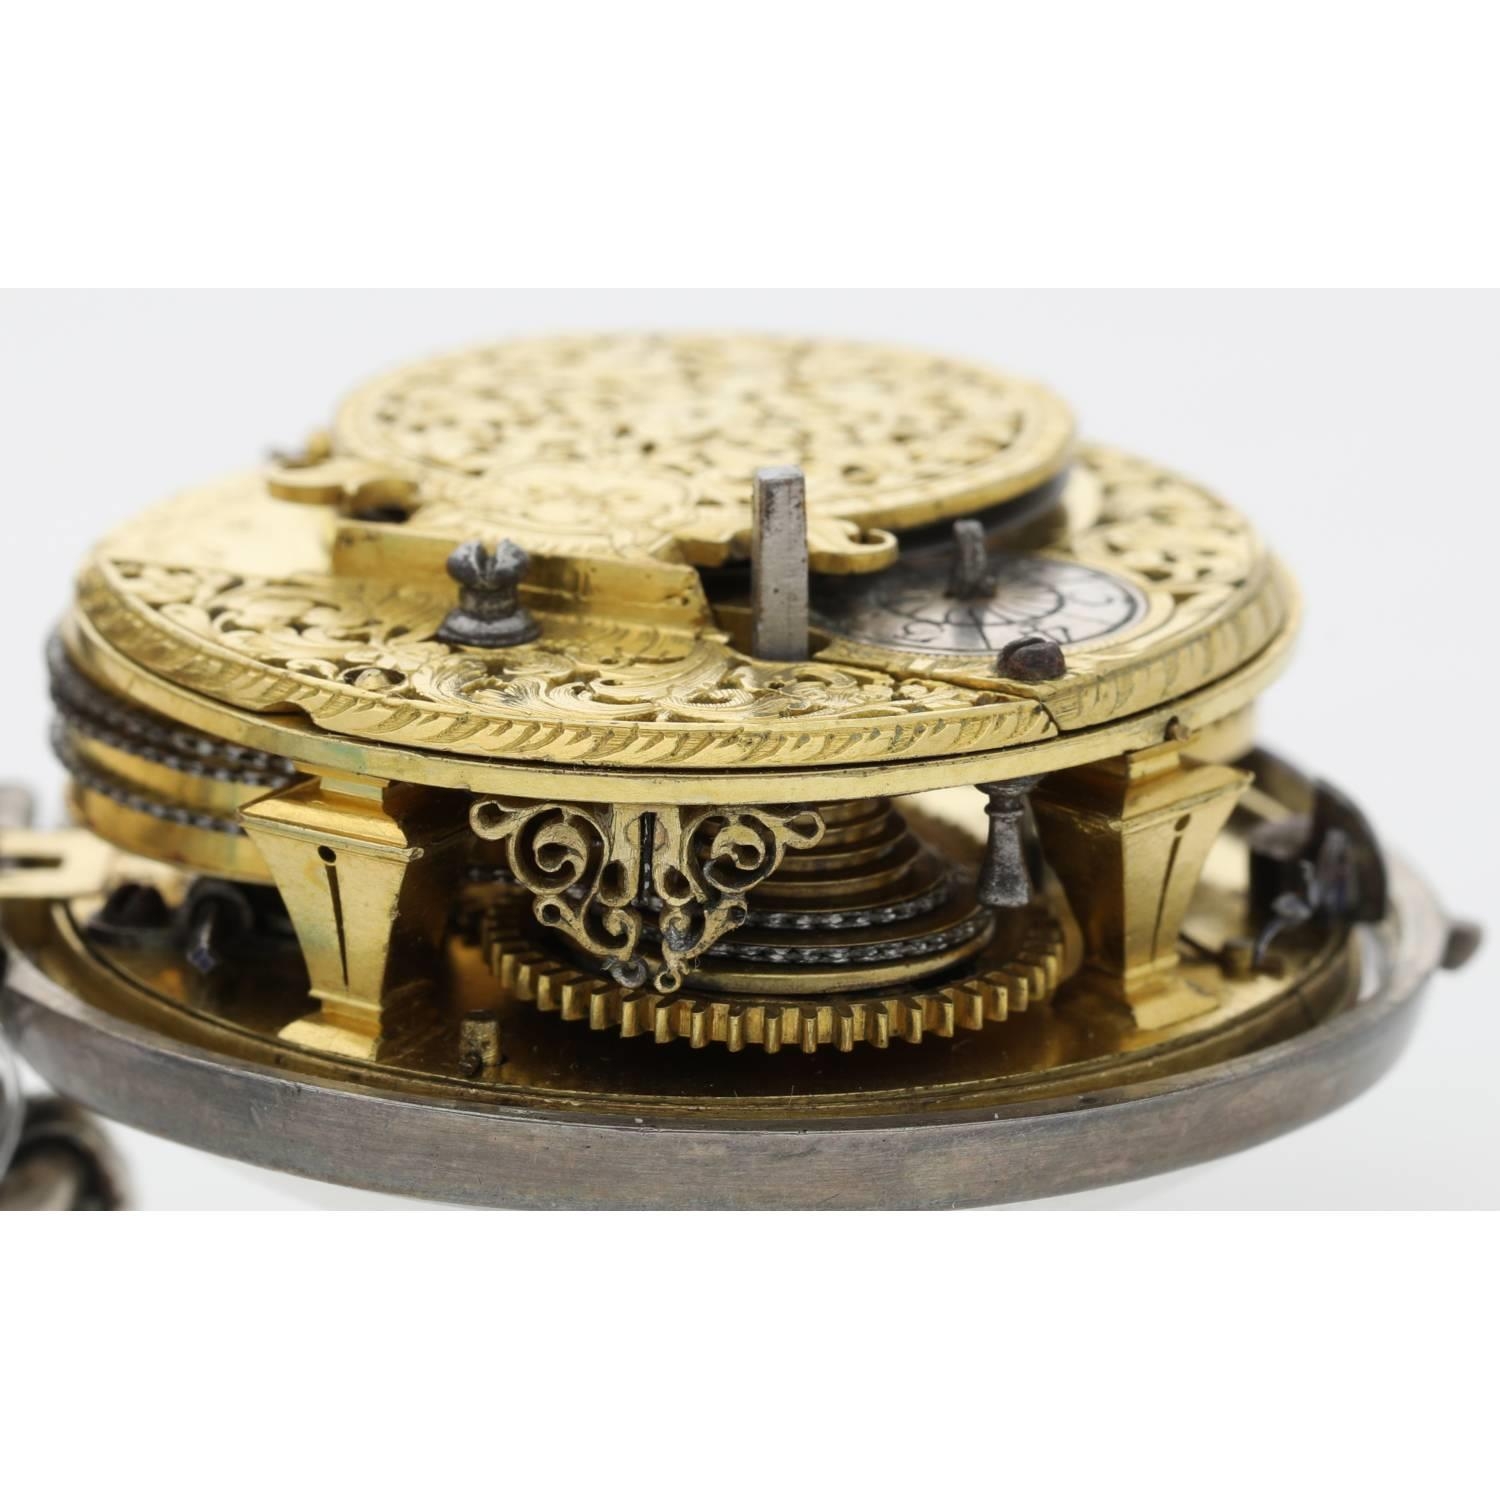 Massy, London - English early 18th century silver pair cased verge pocket watch, circa 1705, - Image 6 of 10